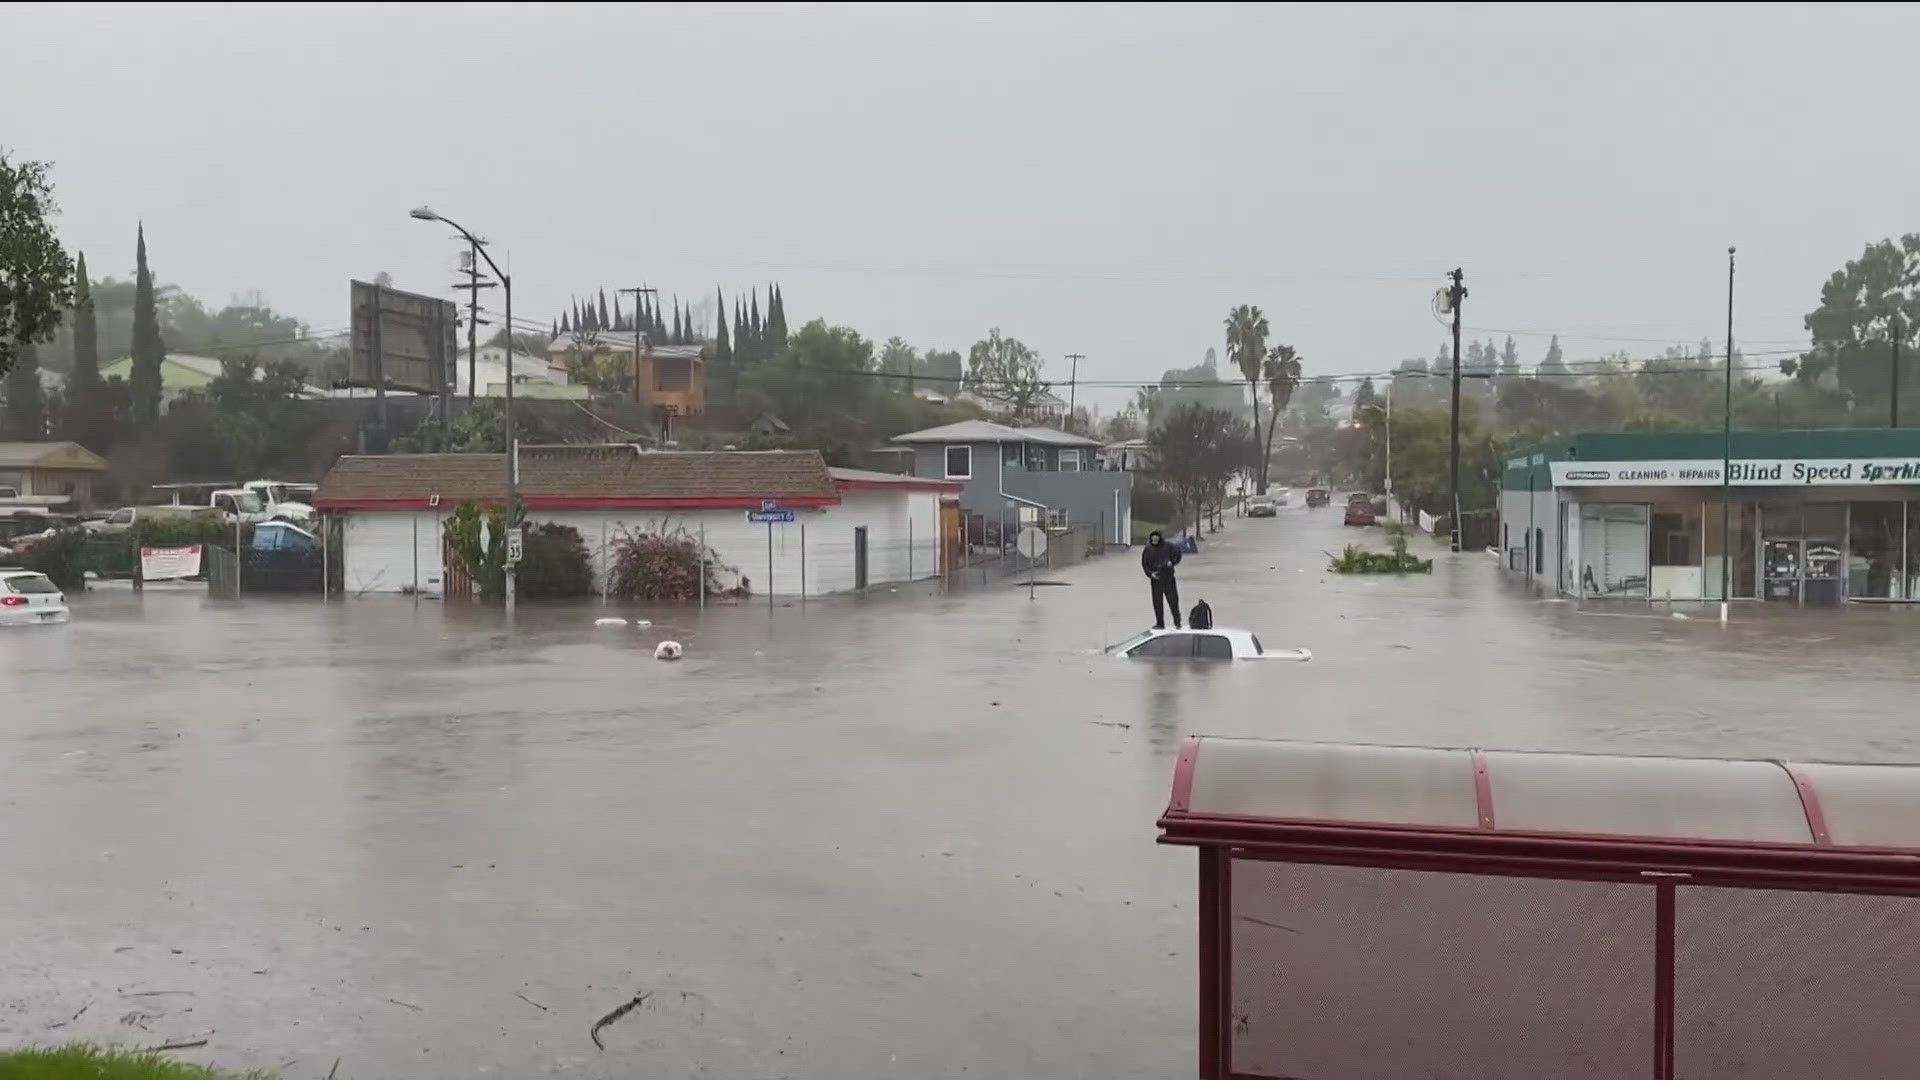 CBS 8 is partnering with the San Diego Foundation and The Salvation Army to help those impacted by Monday's storm.